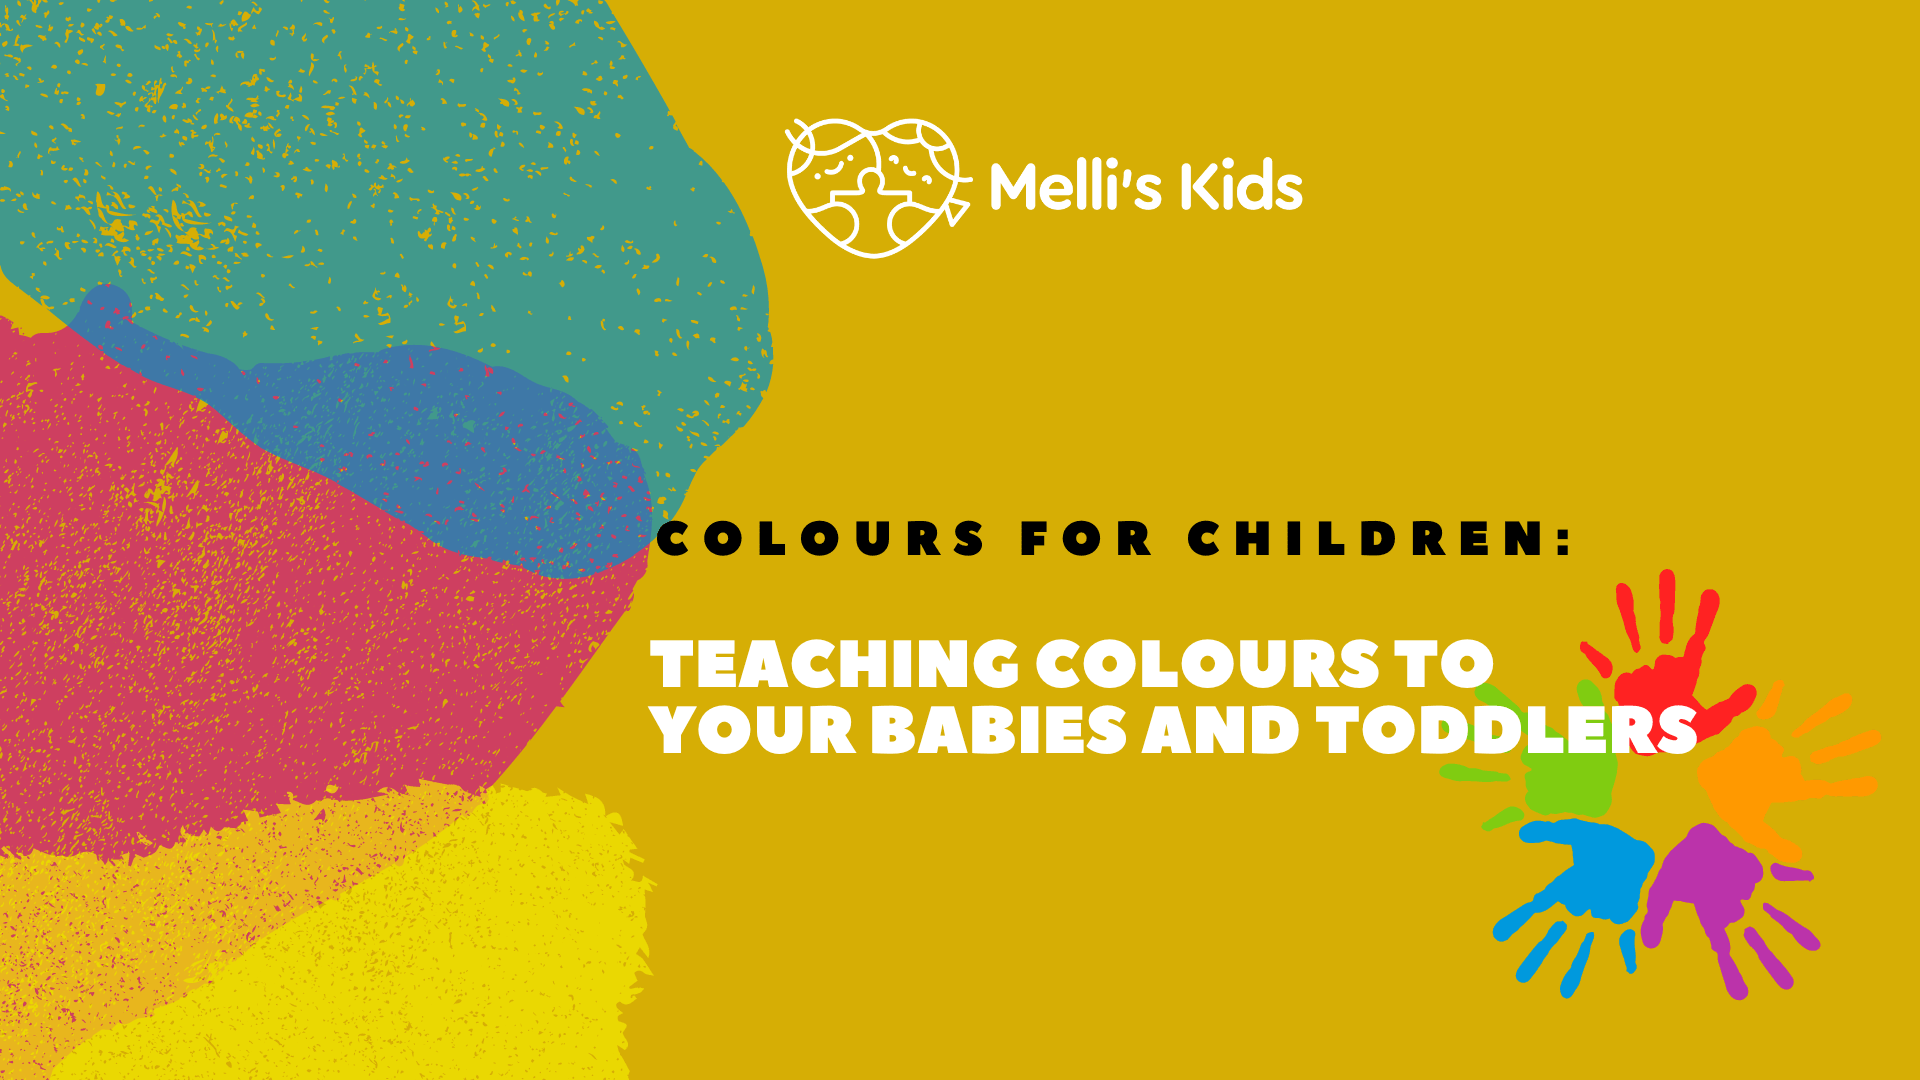 Colours for children: Teaching colours to your babies and toddlers - Melli's Kids